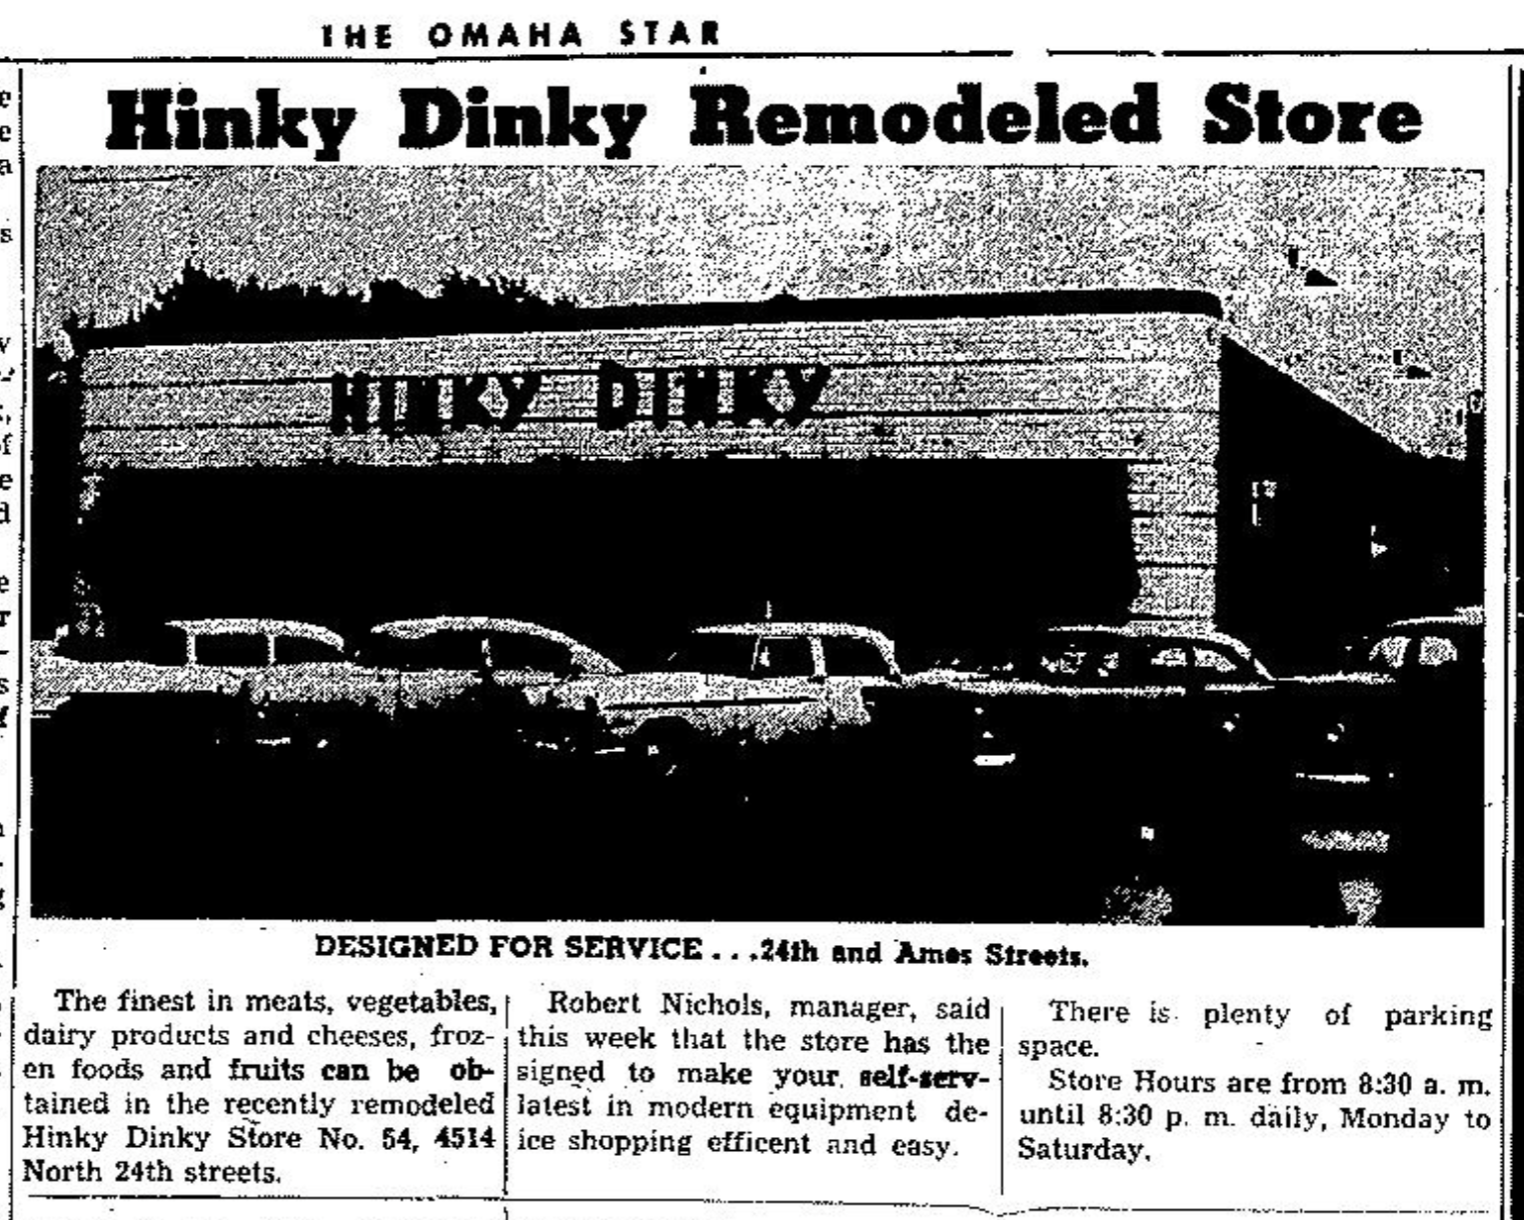 This is an announcement for the new Hinky Dinky store at 24th and Ames from October 1957.